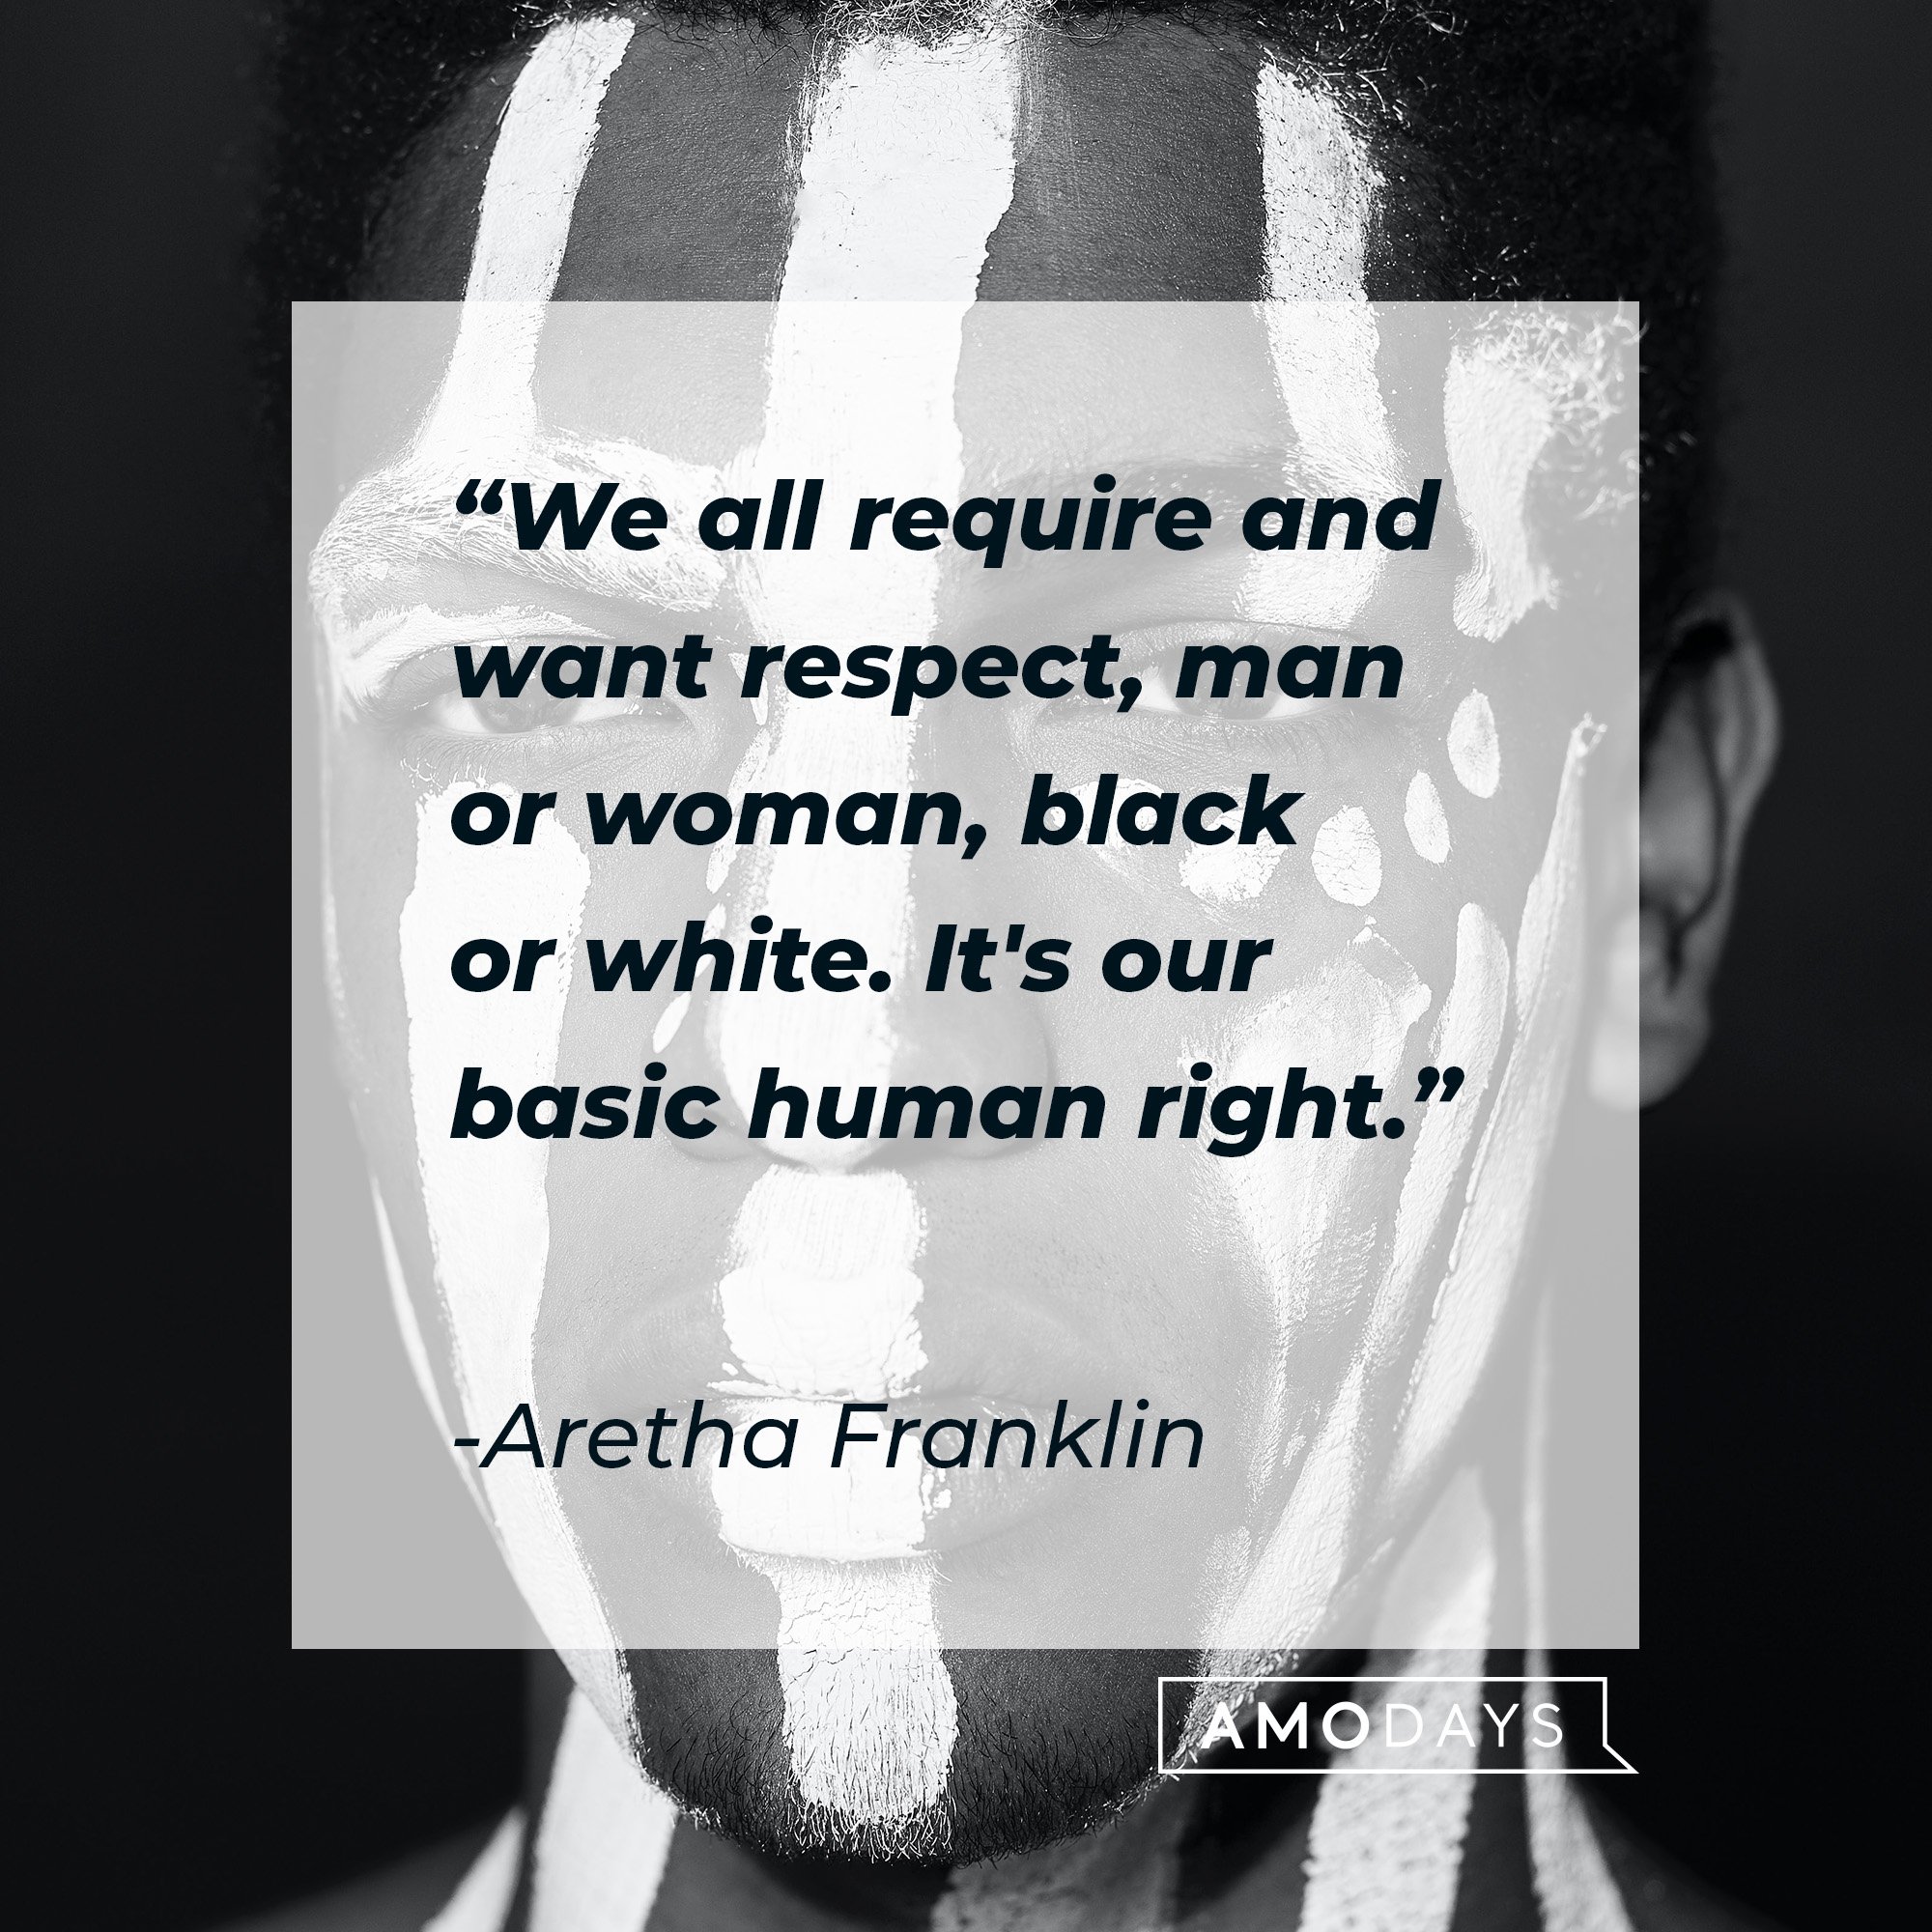 Aretha Franklin’s quote: "We all require and want respect, man or woman, black or white. It's our basic human right." | Image: AmoDays